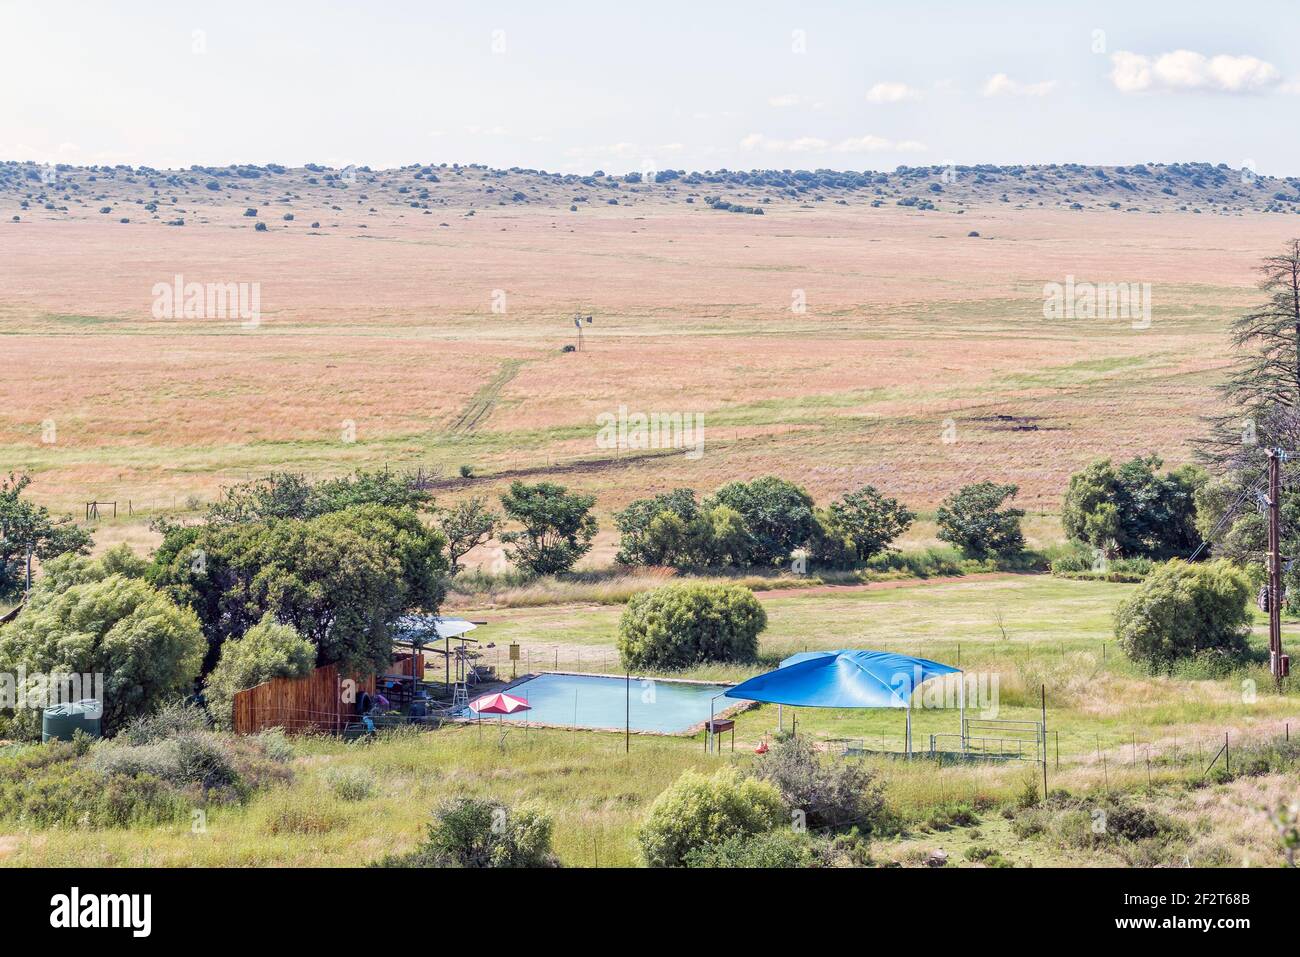 BLOEMFONTEIN, SOUTH AFRICA - FEBRUARY 27, 2021: View of Farm Windhoek, a working farm which offers a caravan park and chalets, near Bloemfontein. A sw Stock Photo